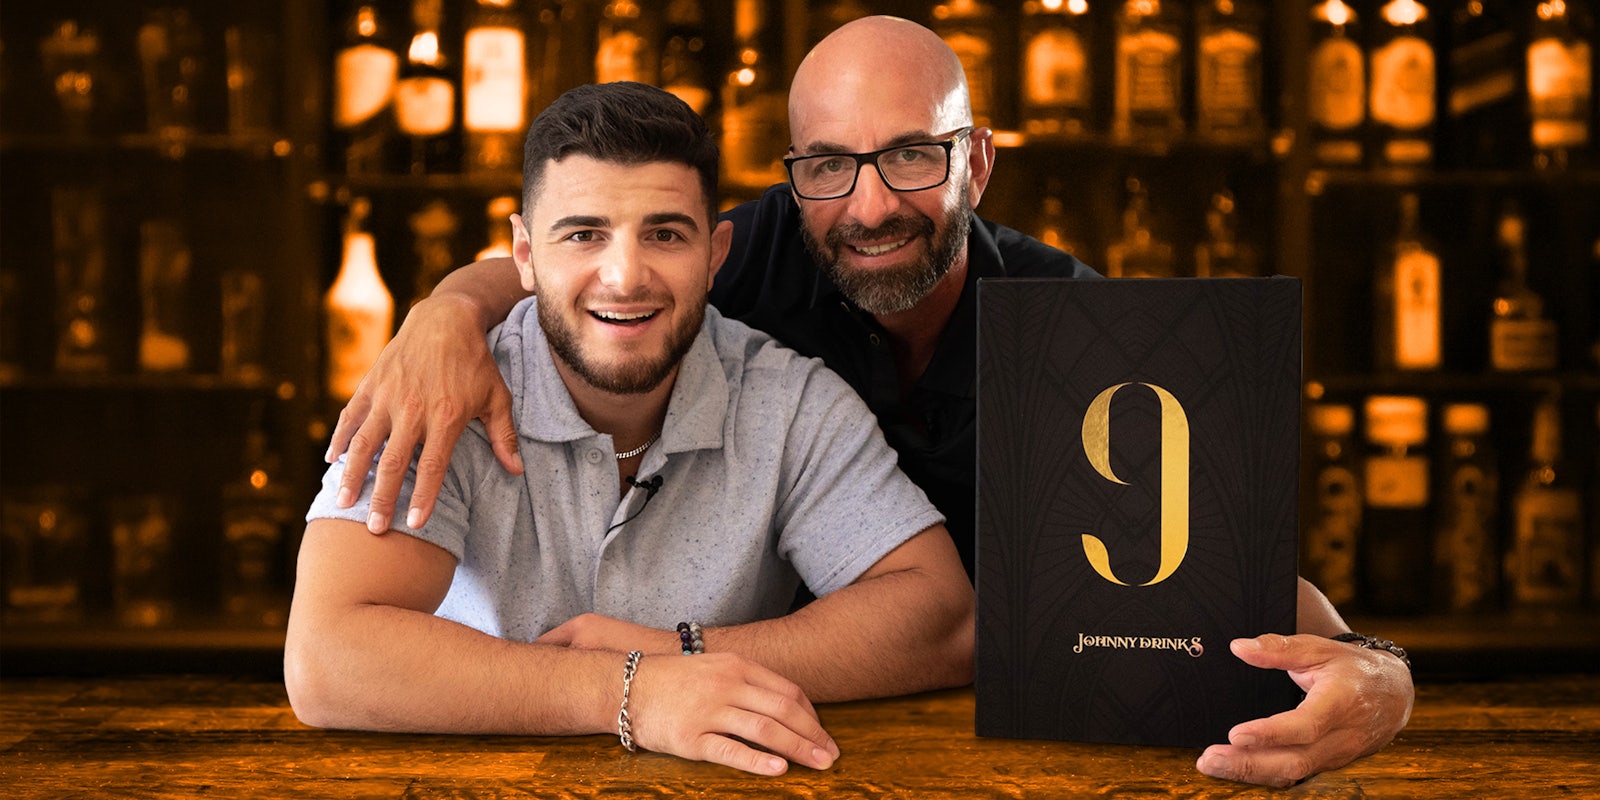 Two men at a bar with a plaque that reads '9 Johnny Drinks'